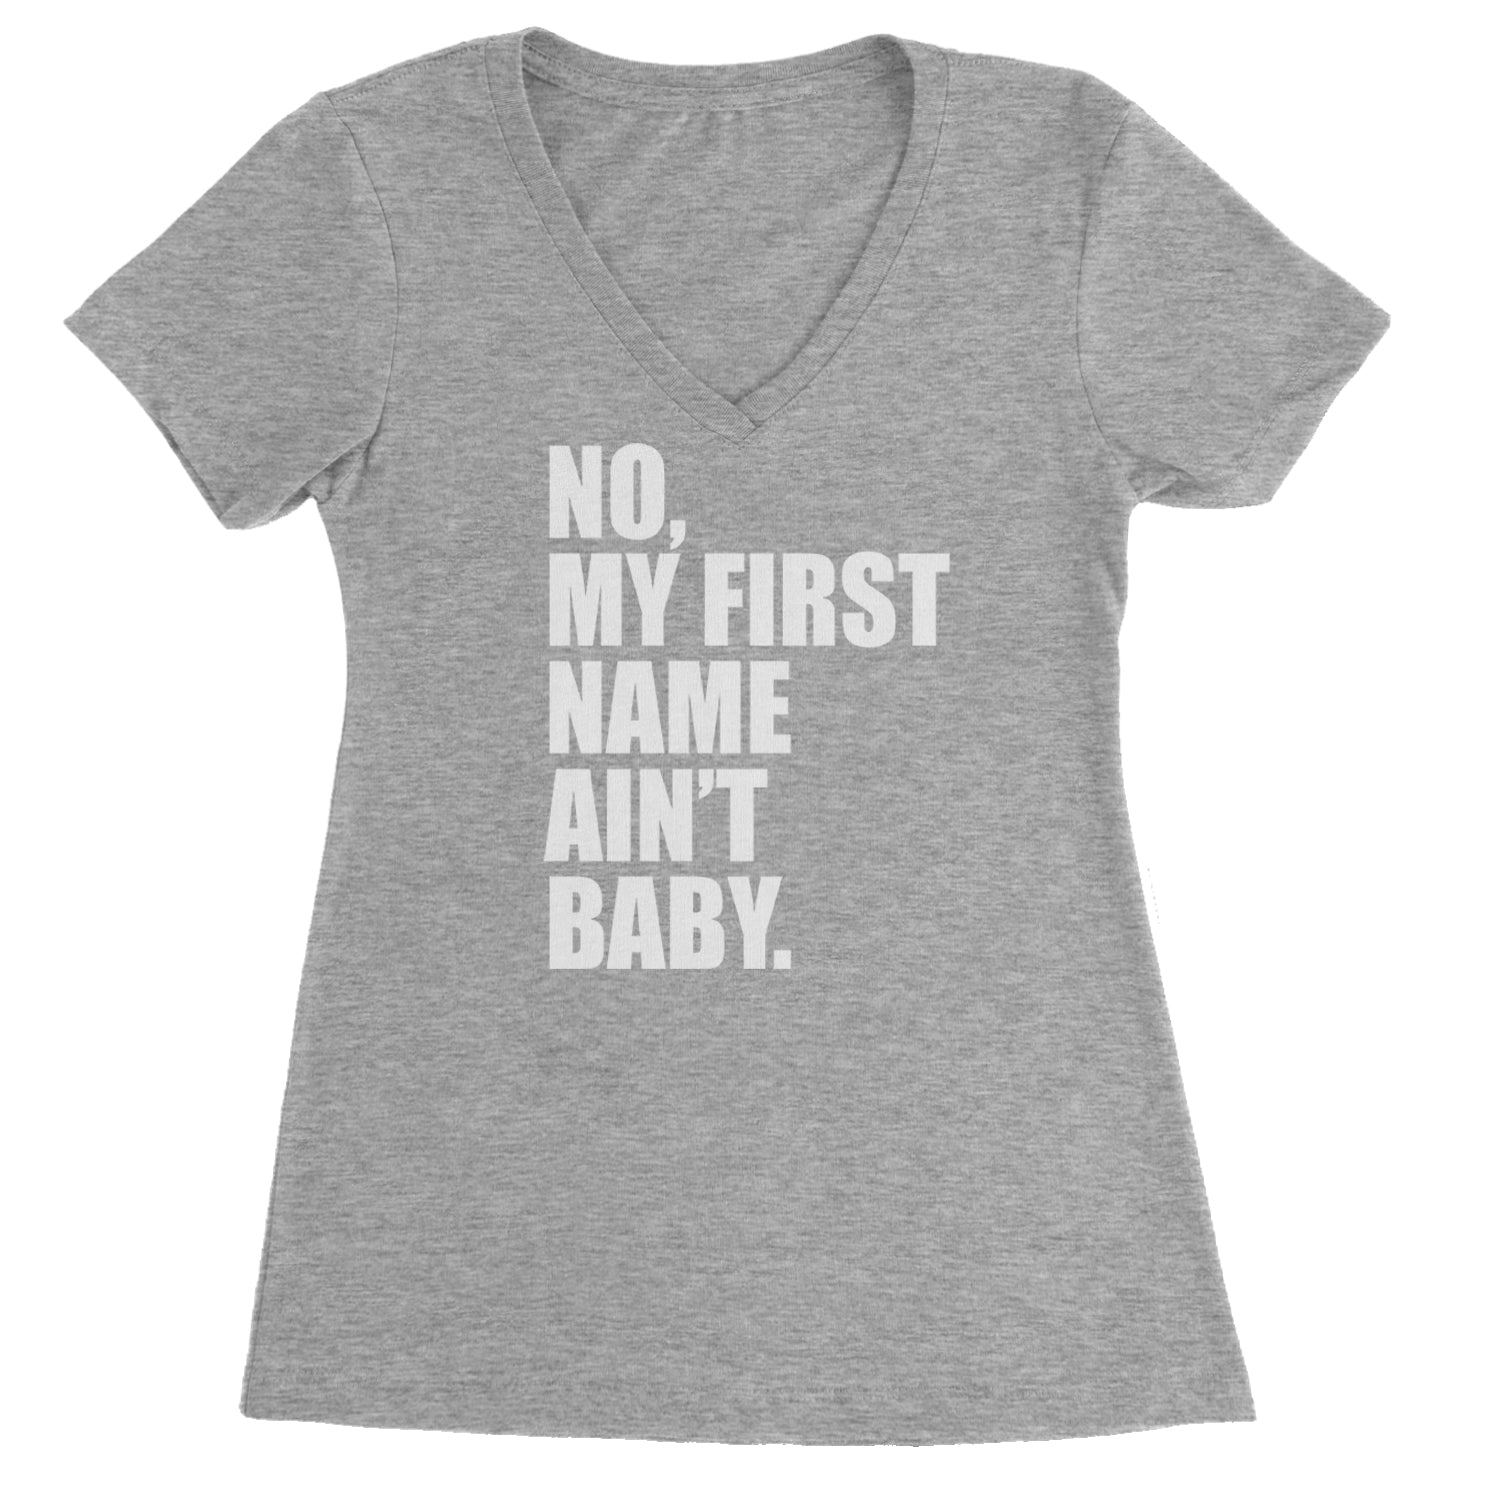 No My First Name Ain't Baby Together Again Ladies V-Neck T-shirt Heather Grey